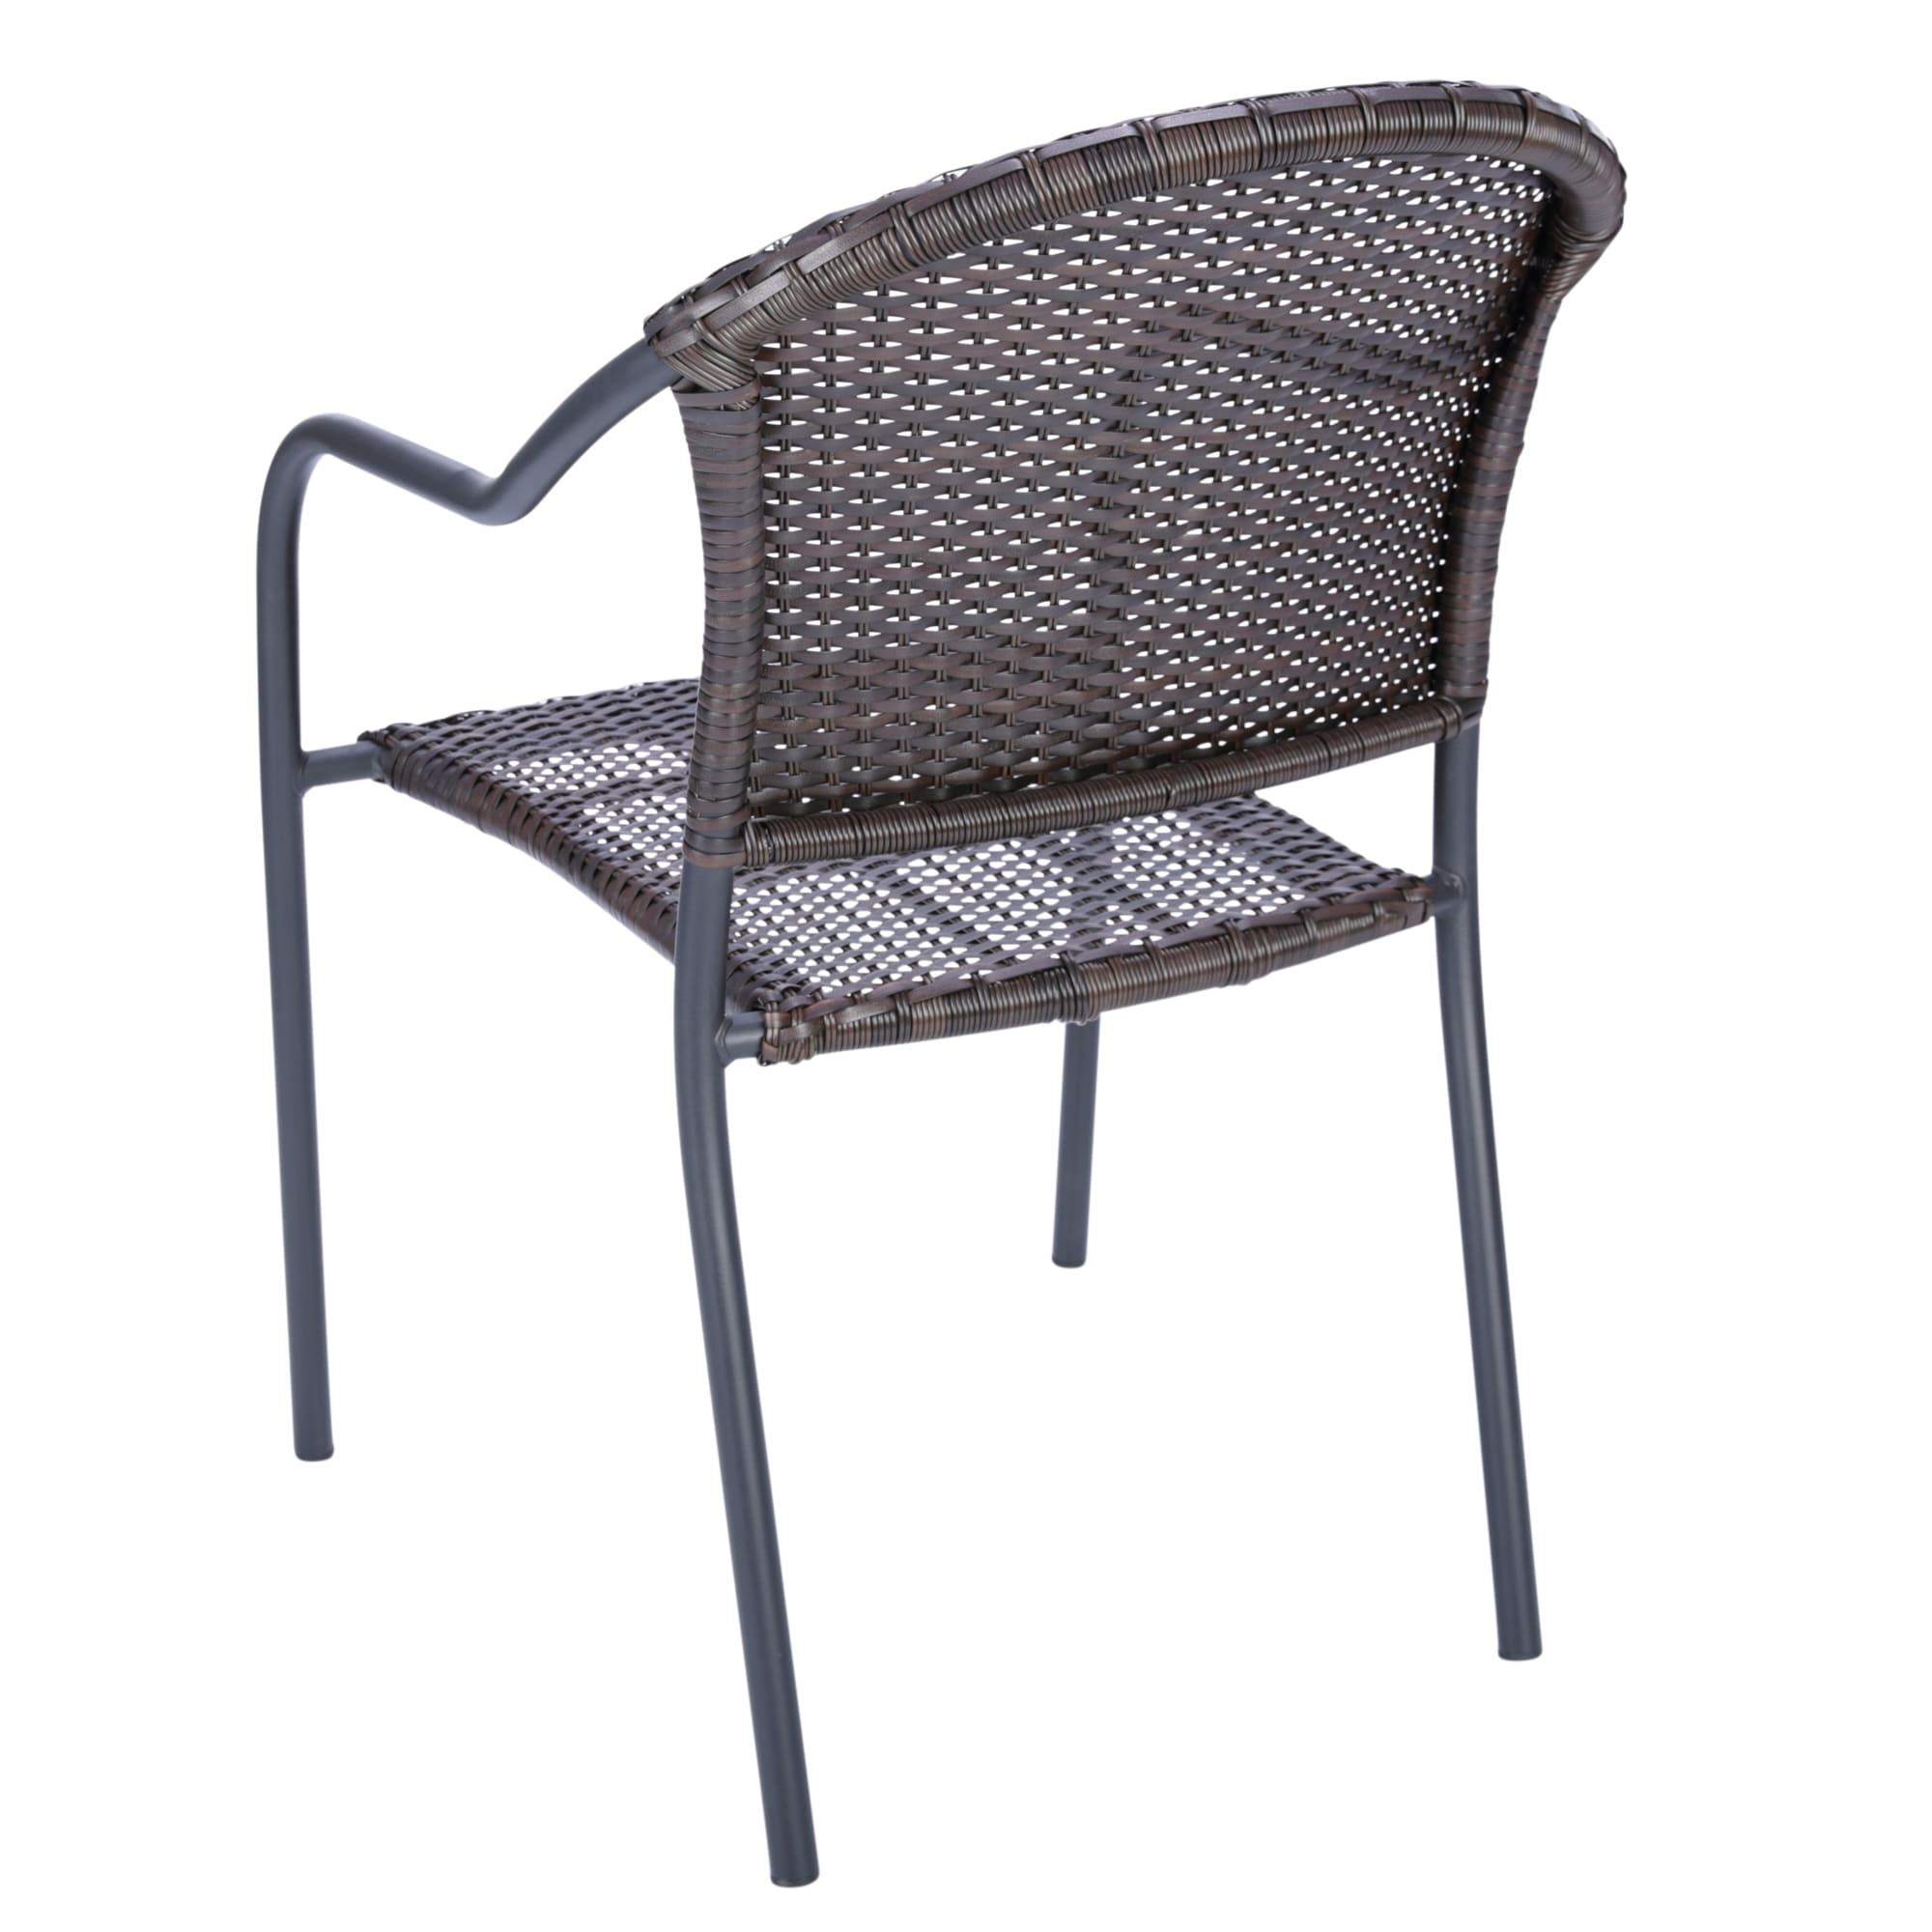 Stacking Wicker Outdoor Patio Dining Chair By Hampton Bay - Patio Furniture